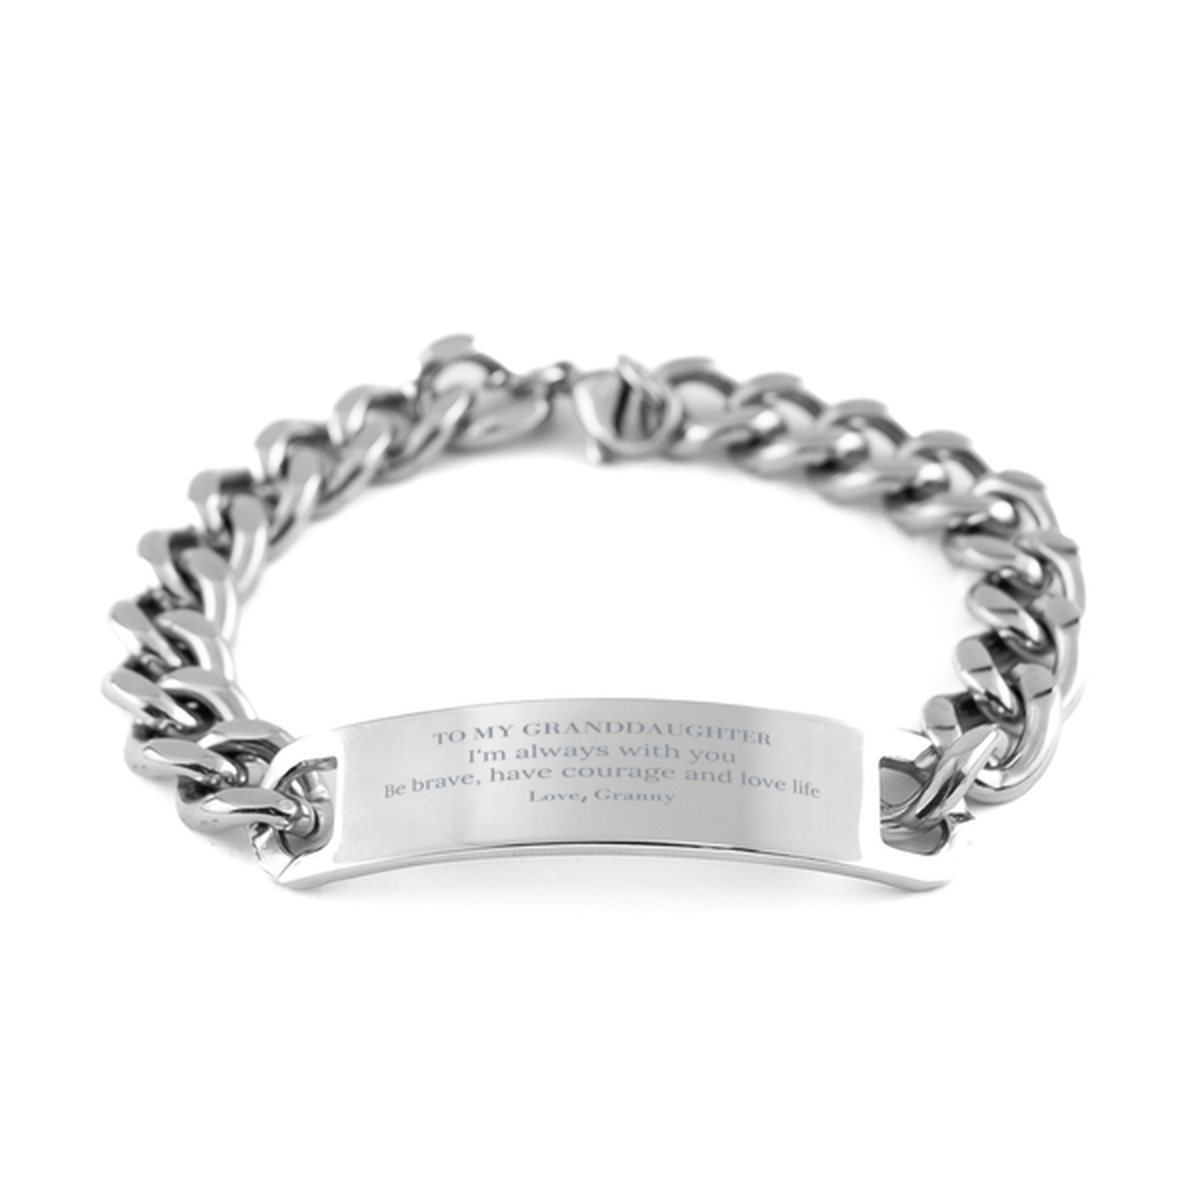 To My Granddaughter Gifts from Granny, Unique Cuban Chain Stainless Steel Bracelet Inspirational Christmas Birthday Graduation Gifts for Granddaughter I'm always with you. Be brave, have courage and love life. Love, Granny